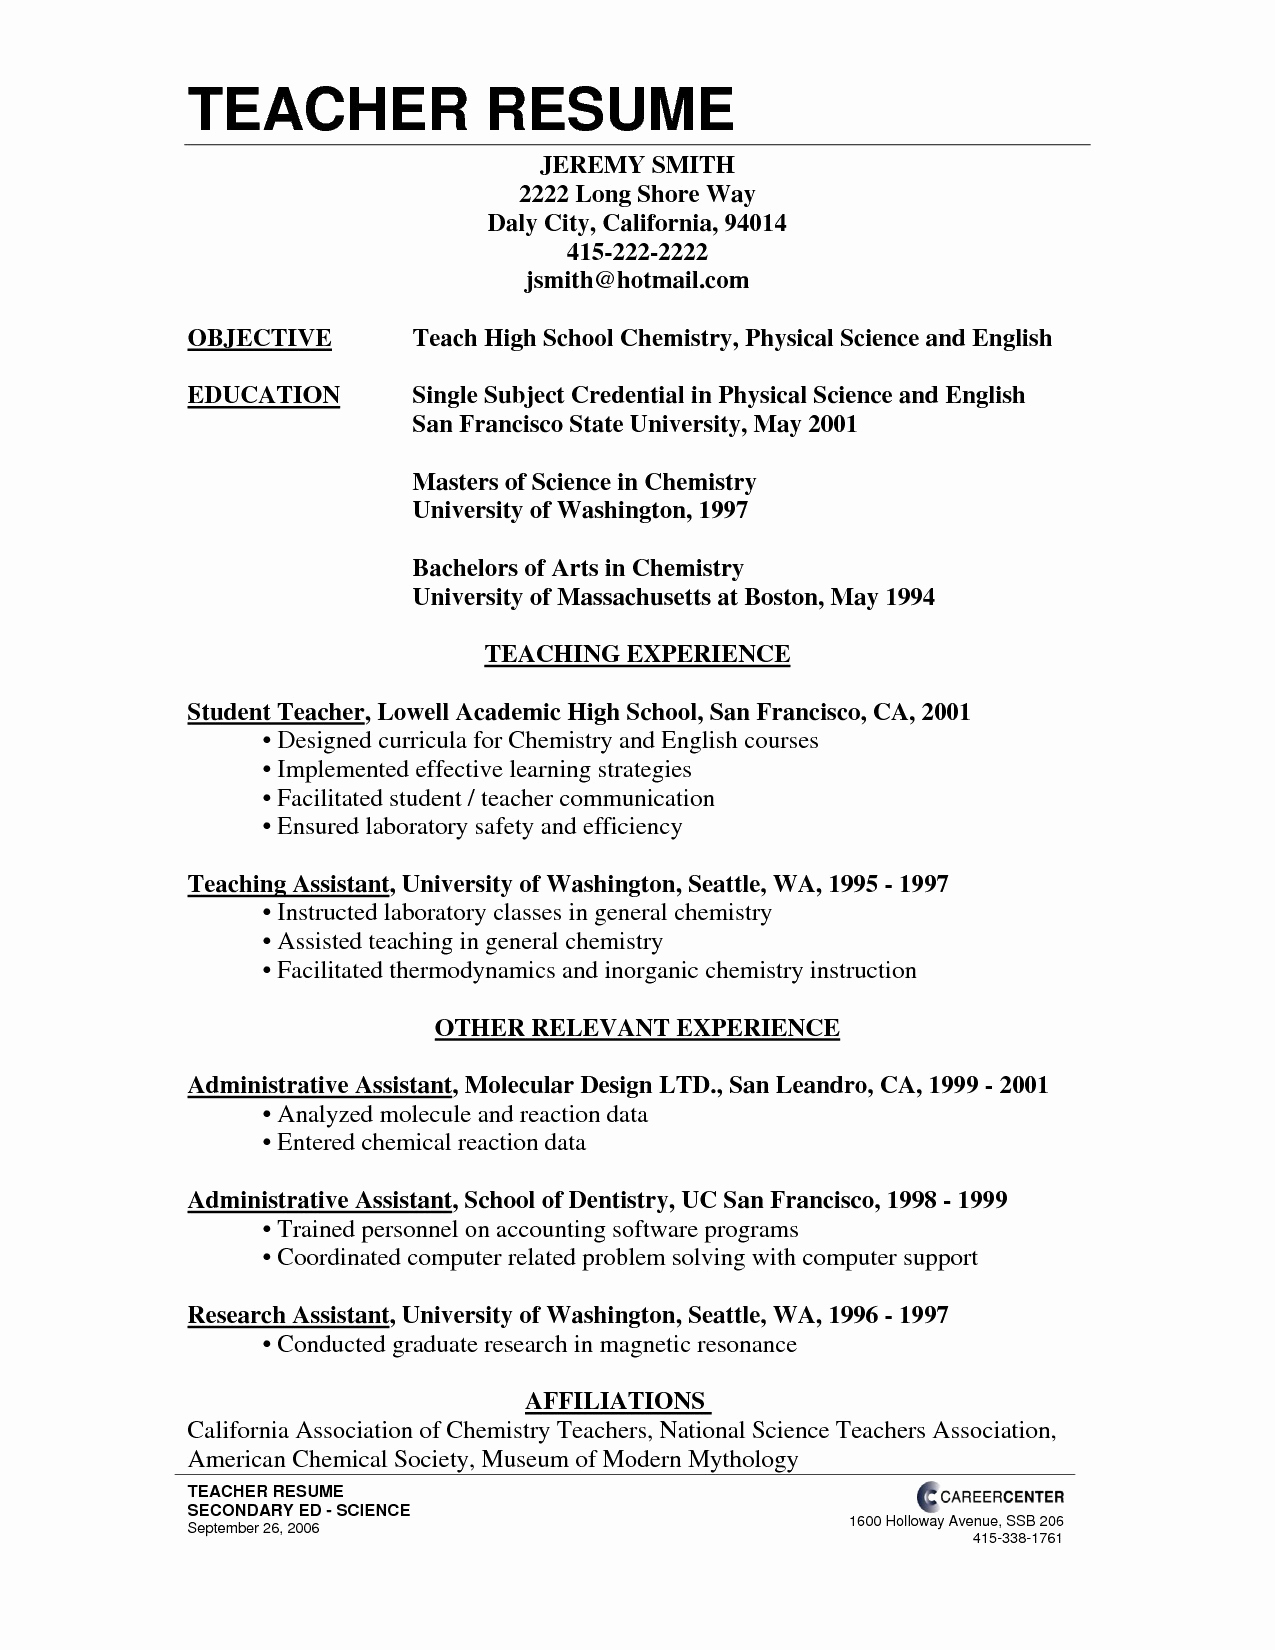 Cover Letter Template Accounting - Resume Cover Letter Example New Free Cover Letter Templates Examples